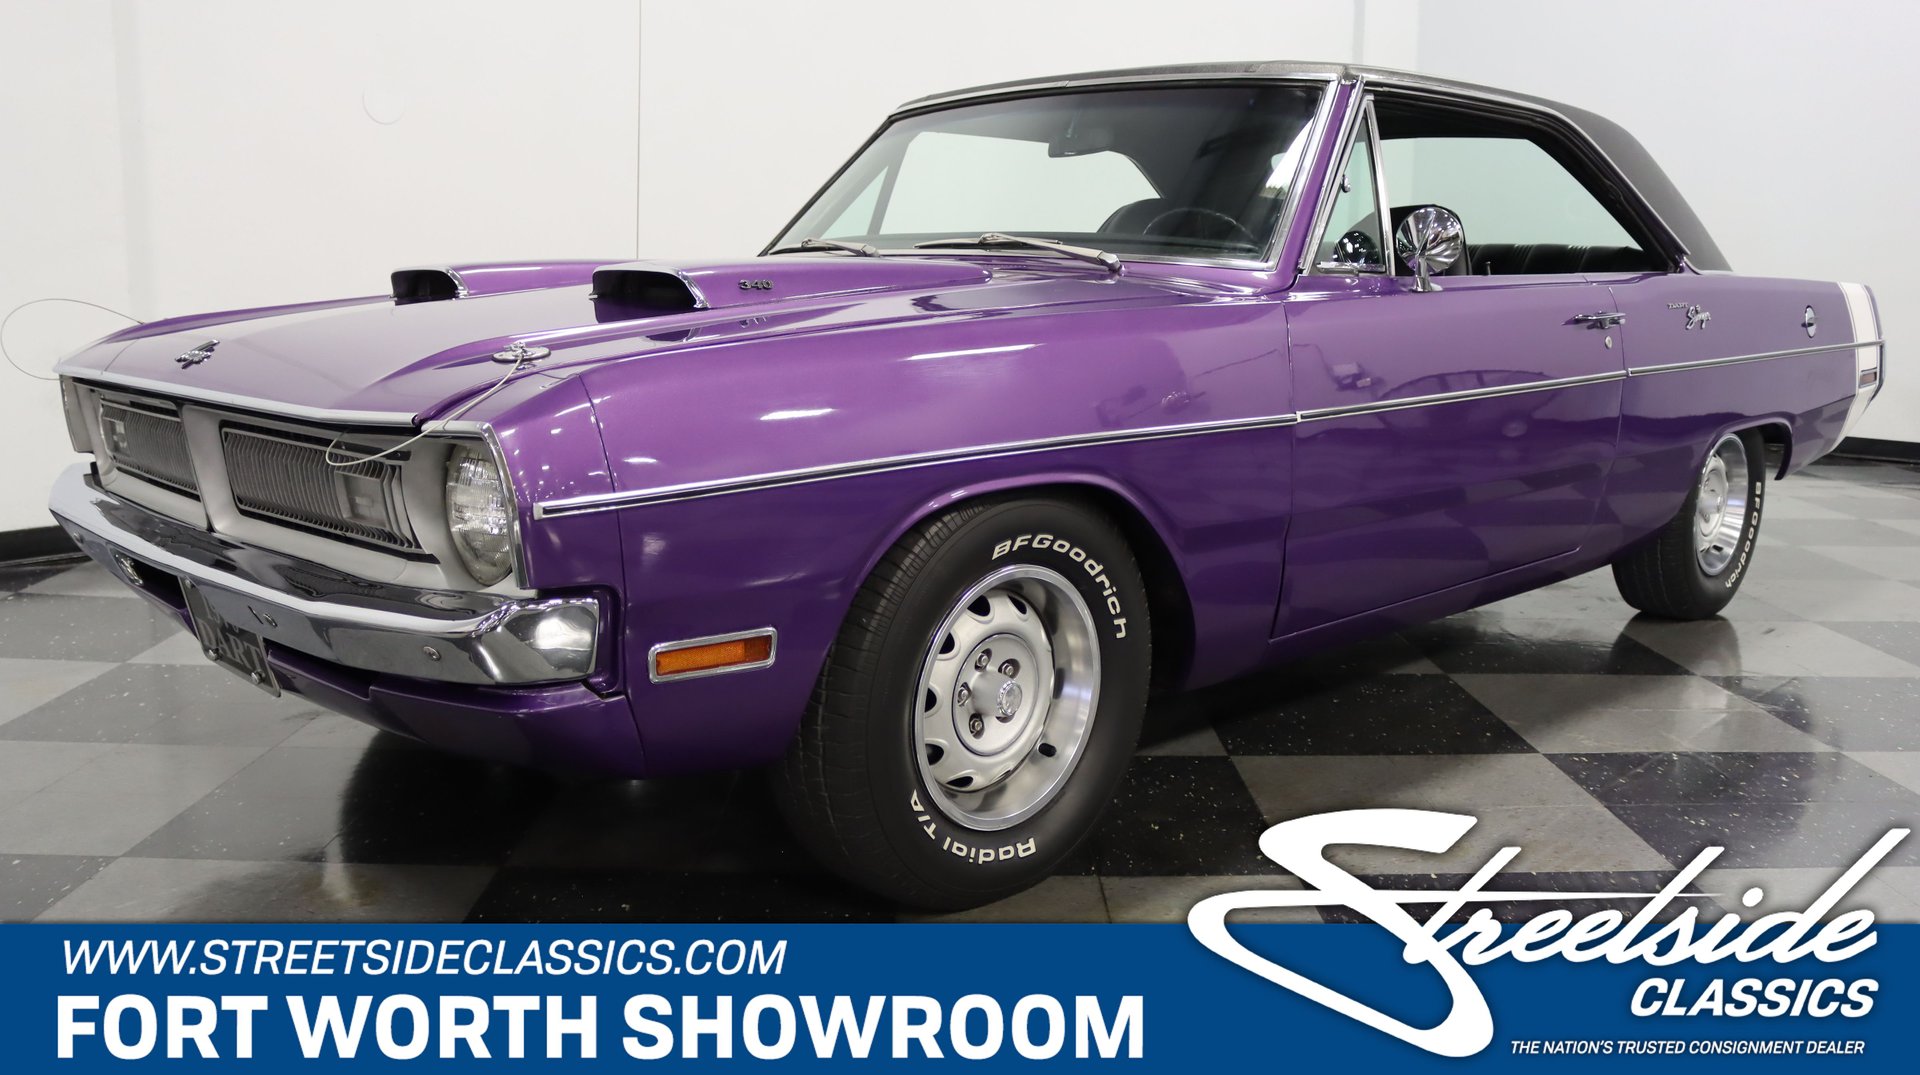 1970 Dodge Dart Classic Cars for Sale pic picture